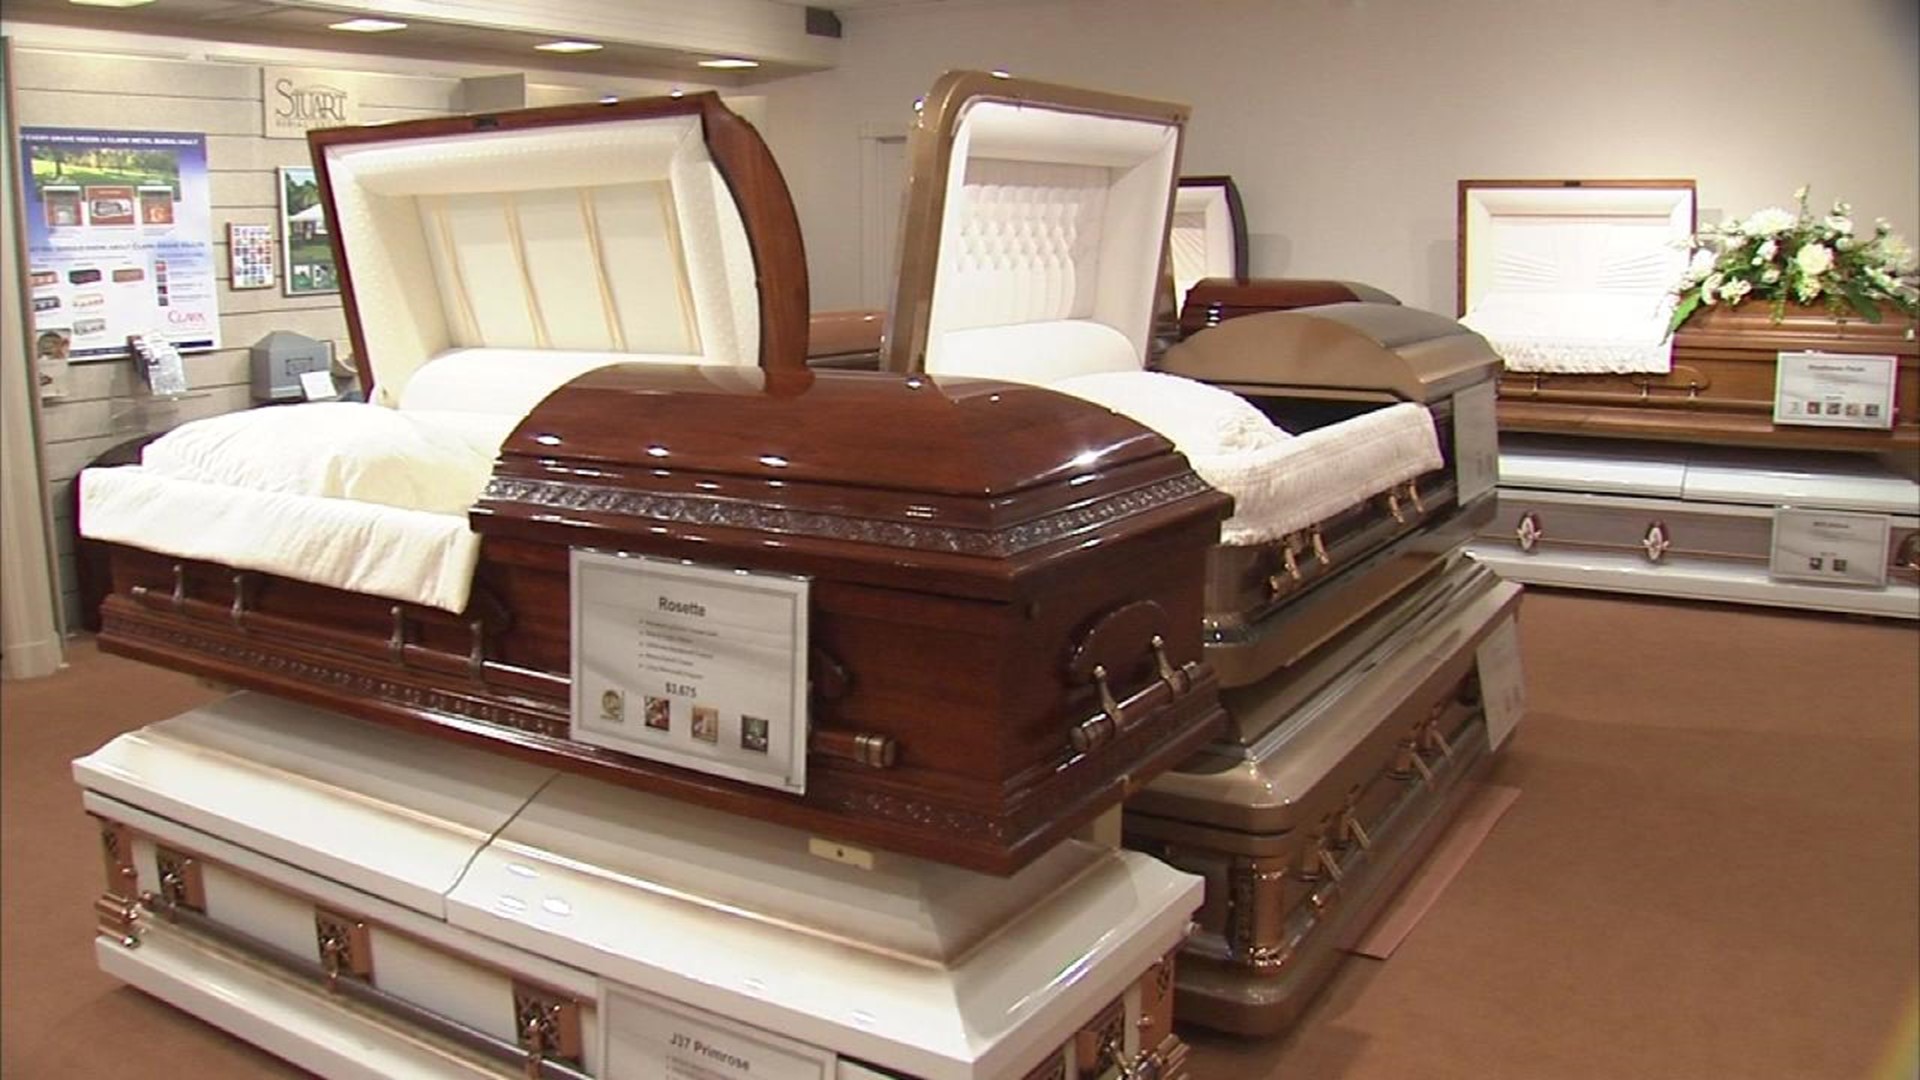 Personalized Funerals Are A Growing Trend